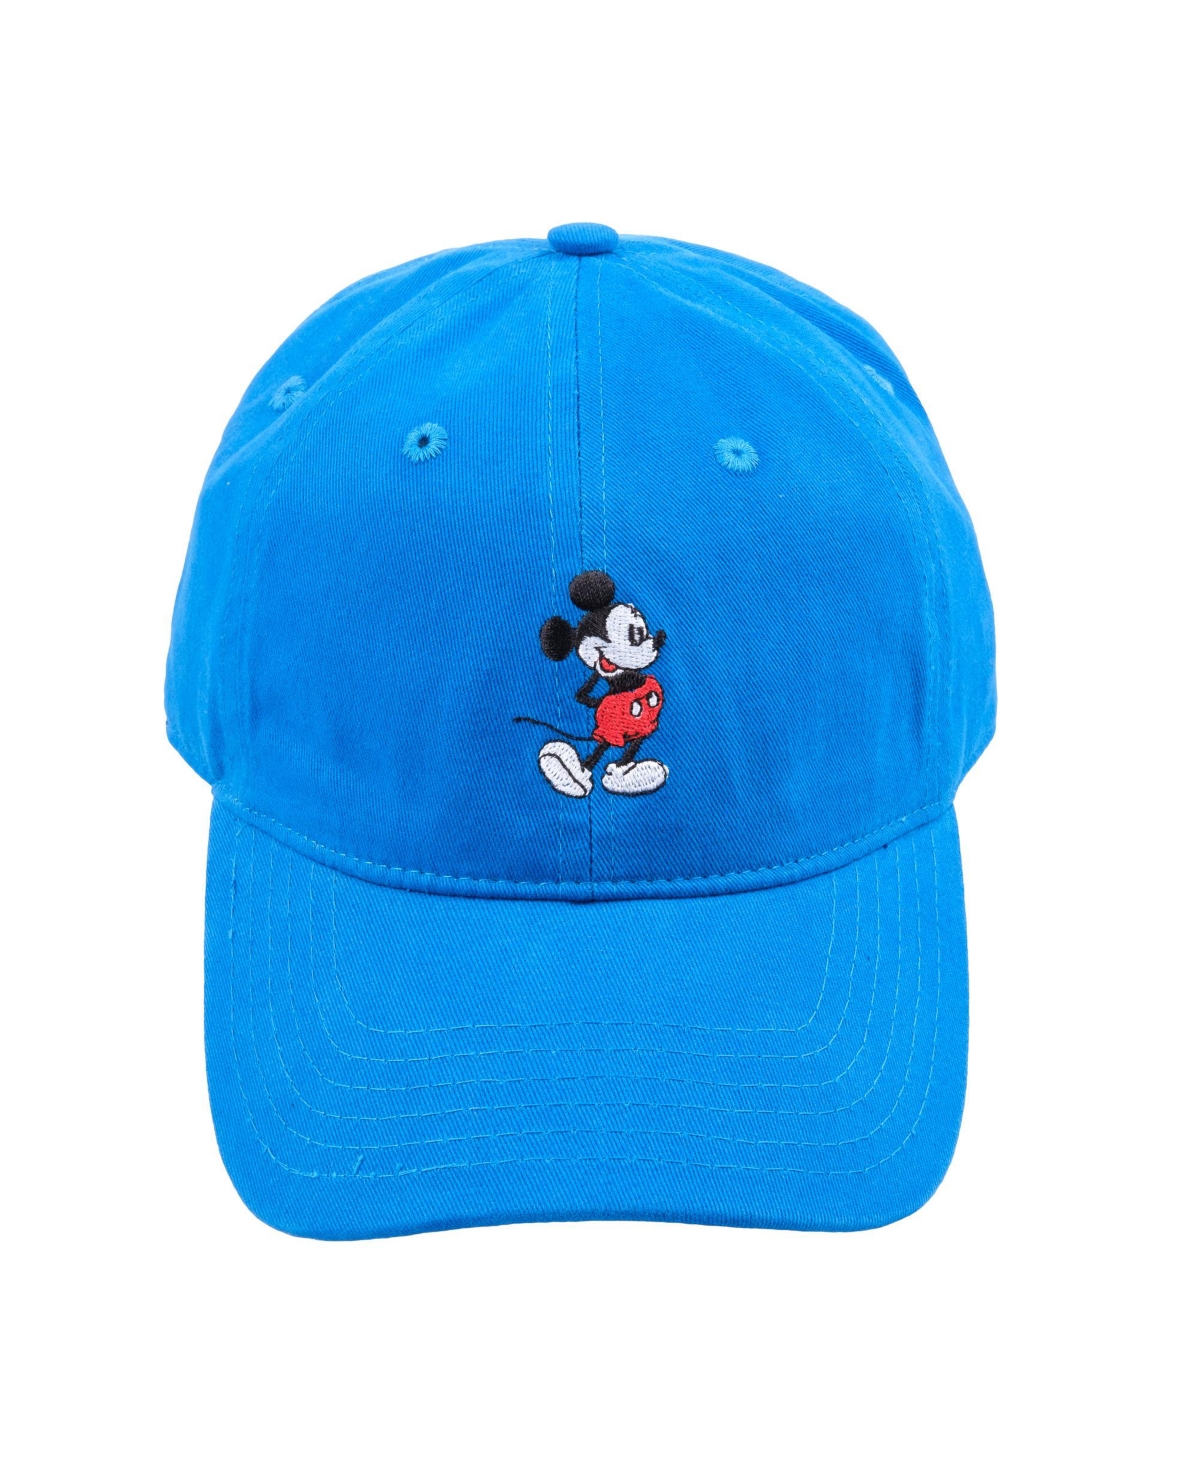 Disney Mickey Mouse Embroidered Cotton Adjustable Dad Hat with Curved Brim - Royal